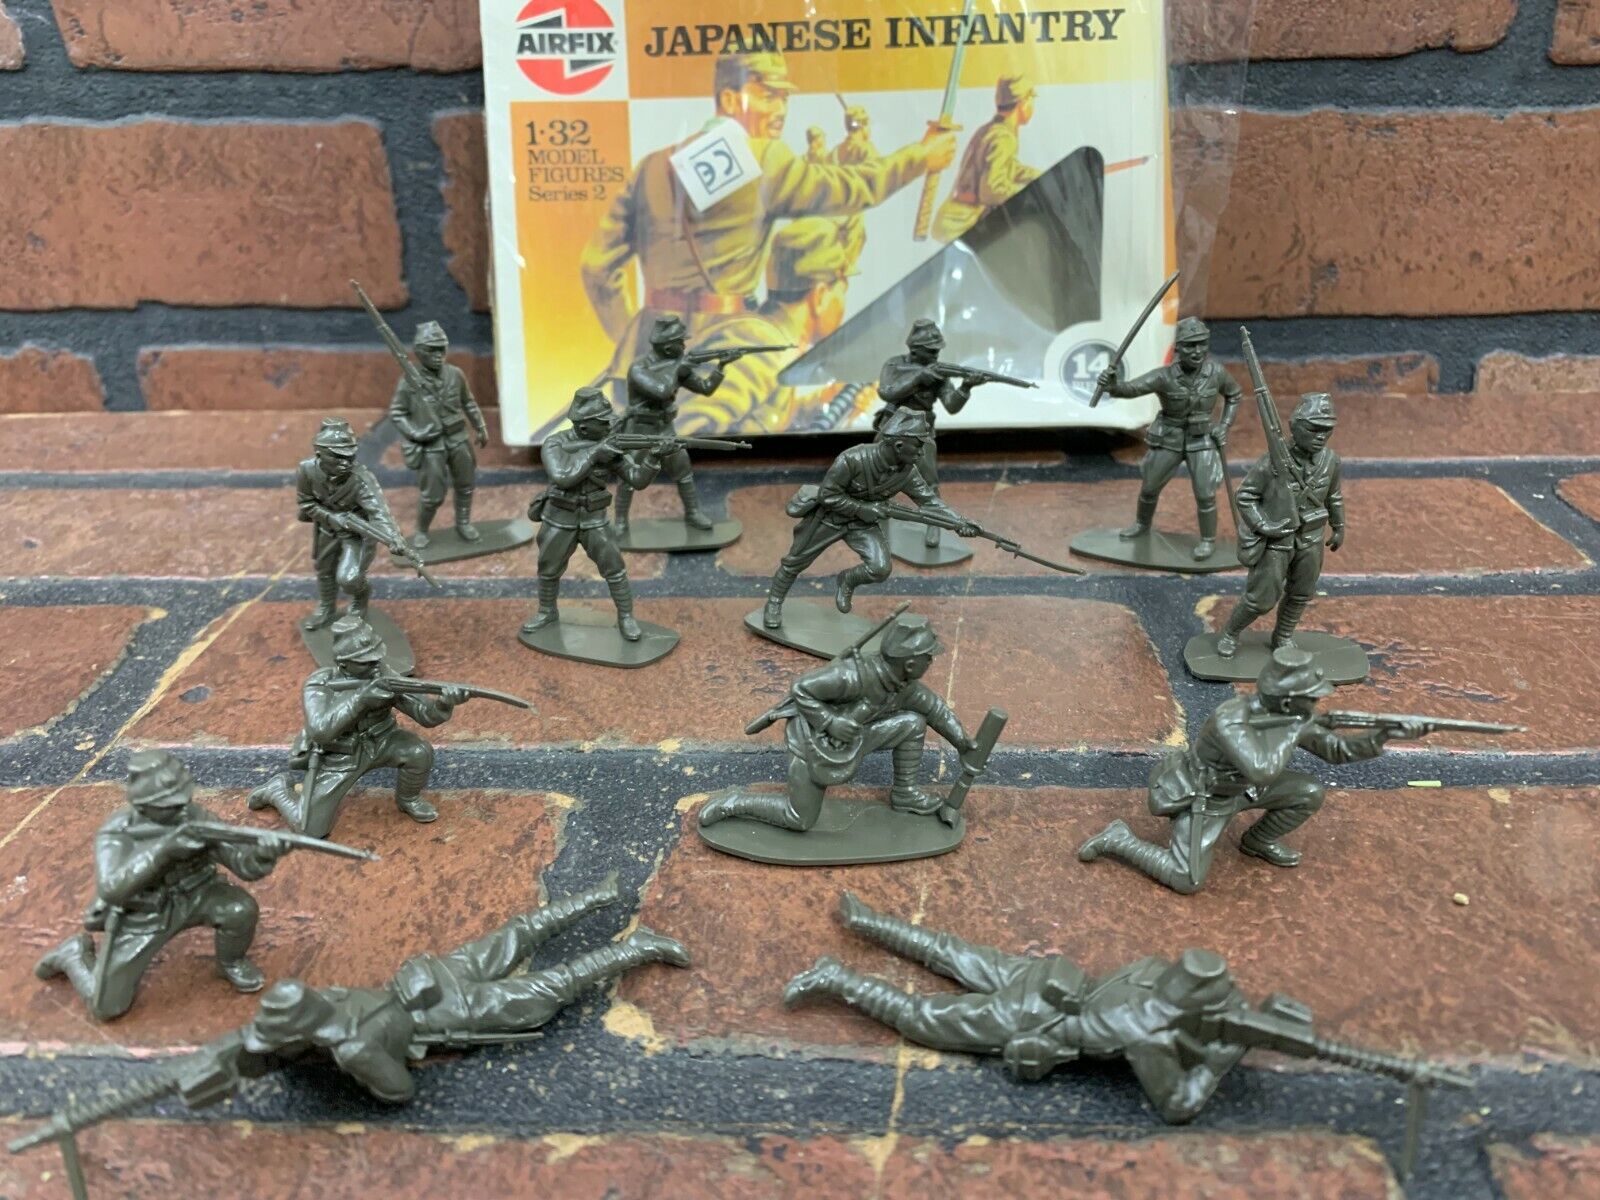 Airfix Military Series 2 JAPANESE INFANTRY 1:32 